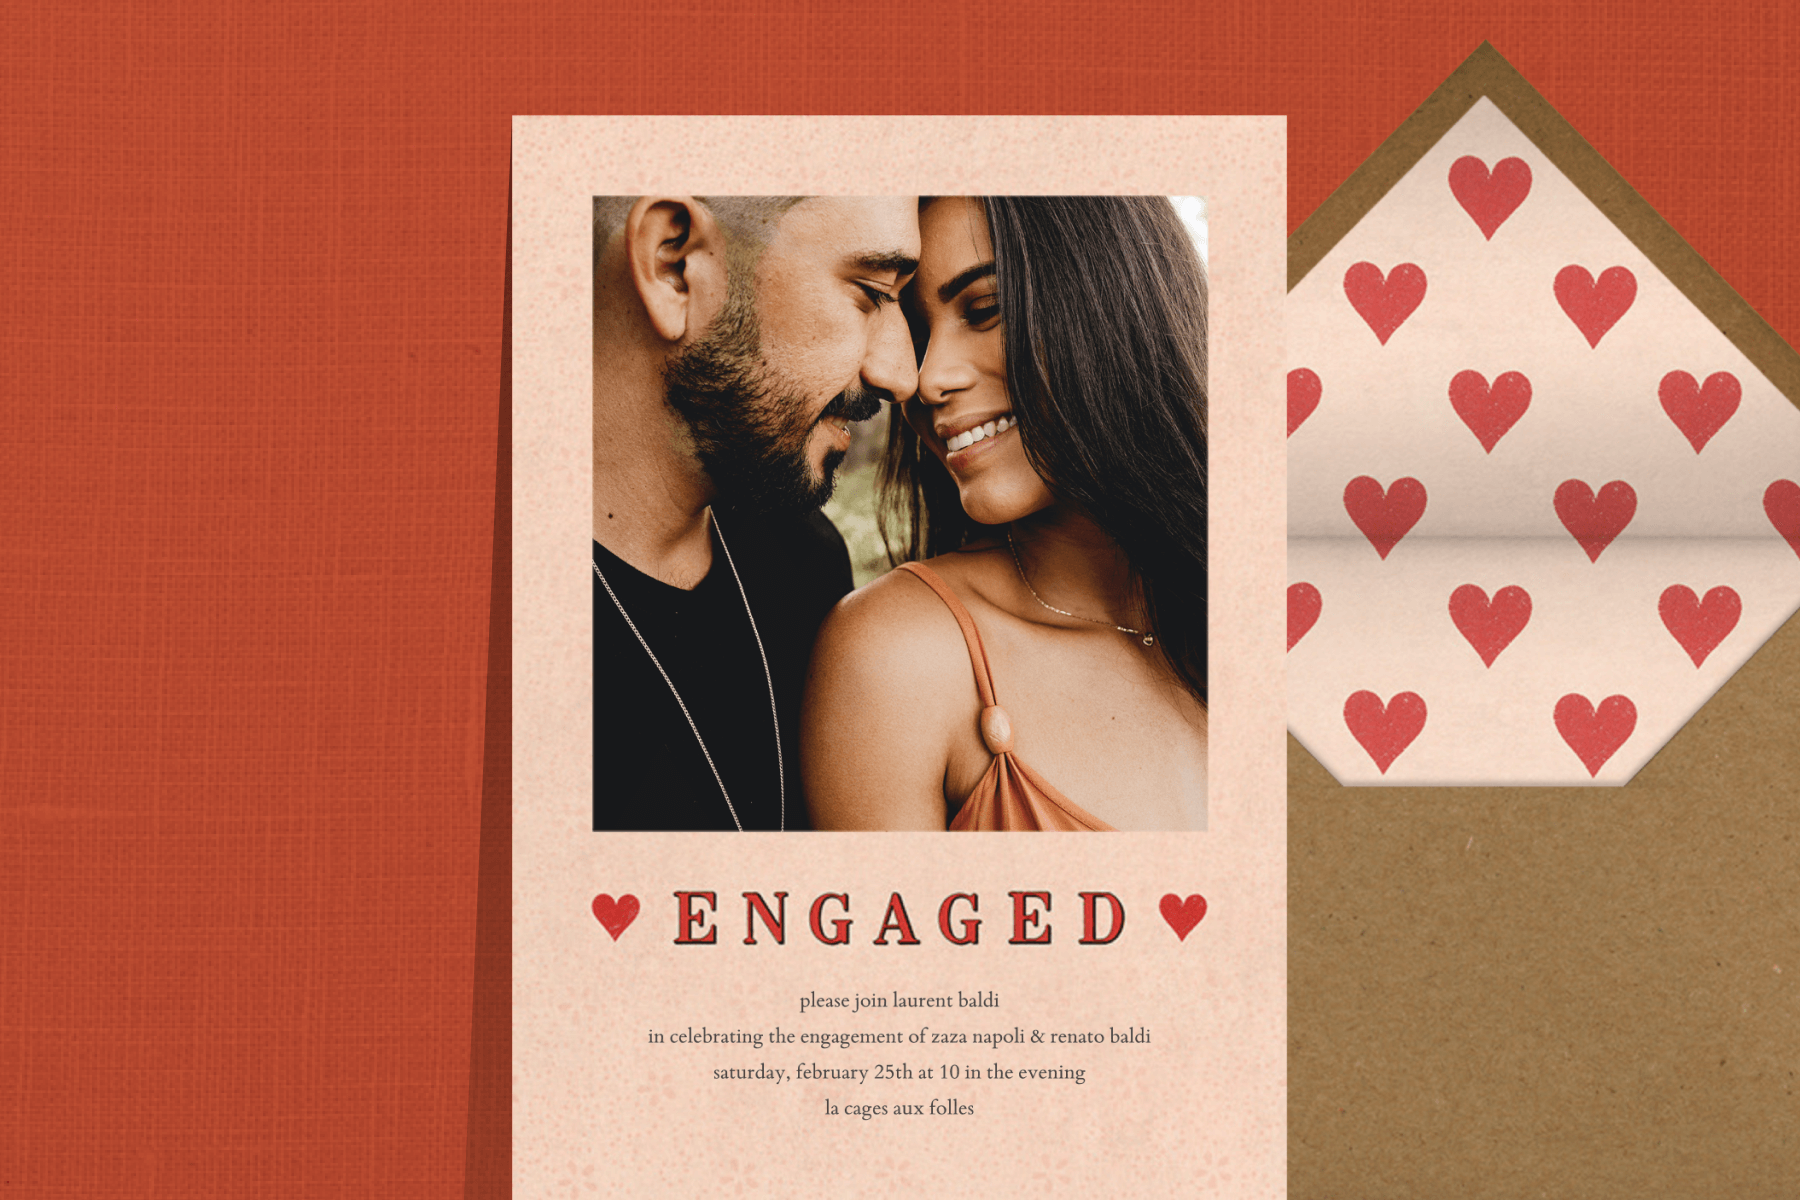 engagement party invitation with a photo of a man and woman and red hearts